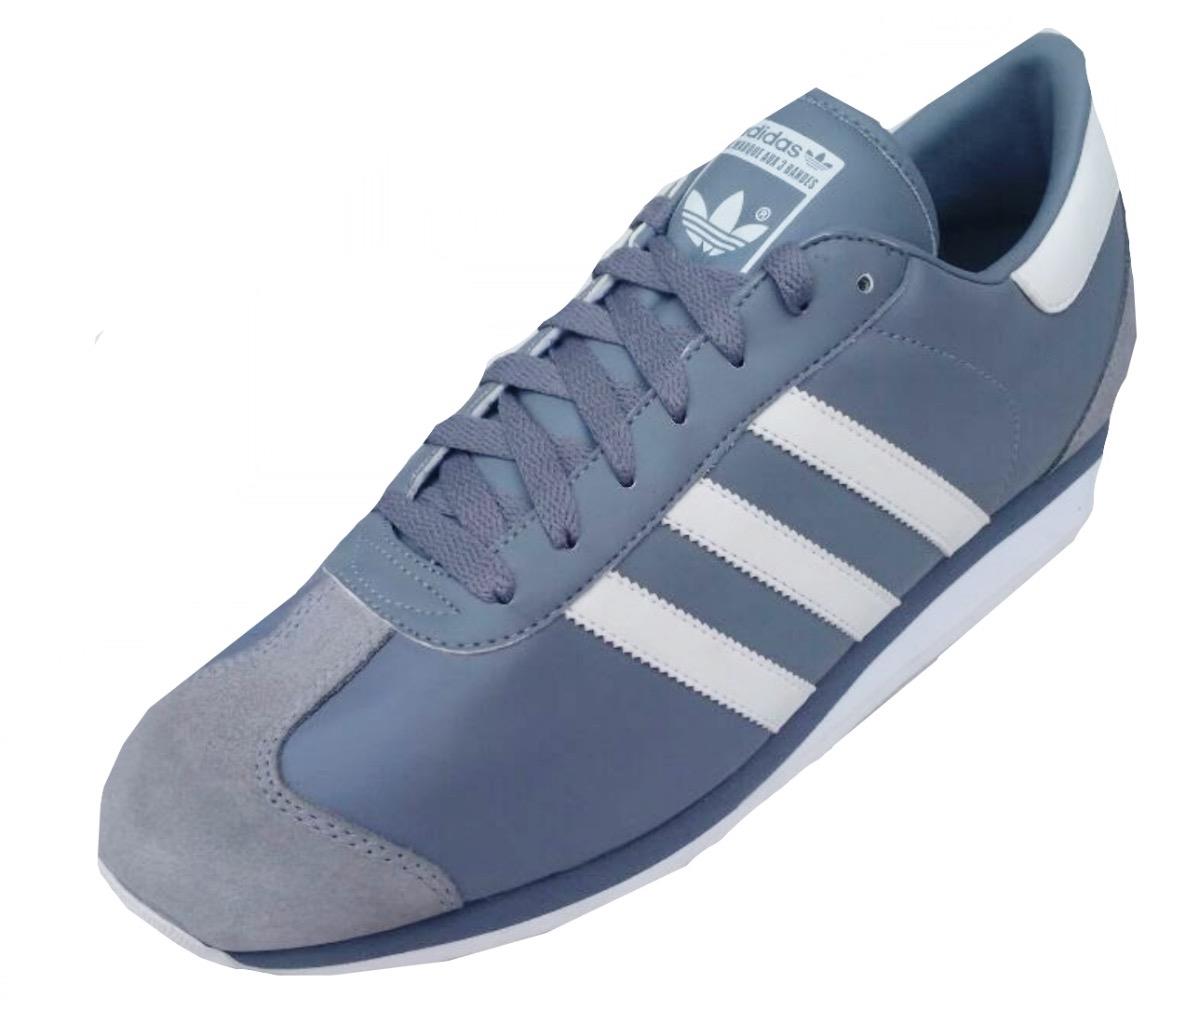 Adidas Originals COUNTRY Classic Mens LEATHER Trainers G61125 Grey UK11 ...